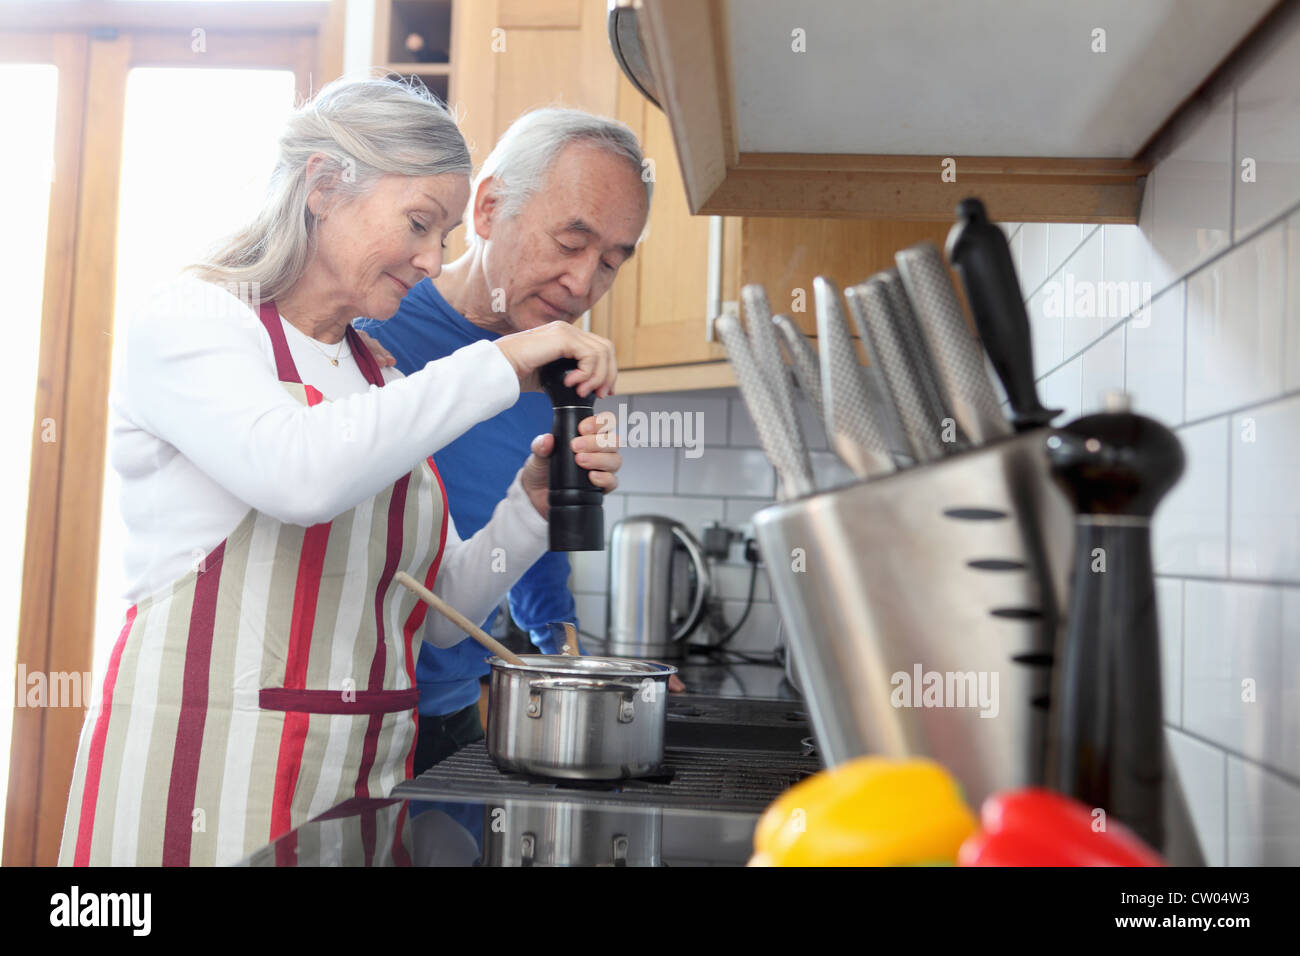 Older couple cooking together in kitchen Stock Photo